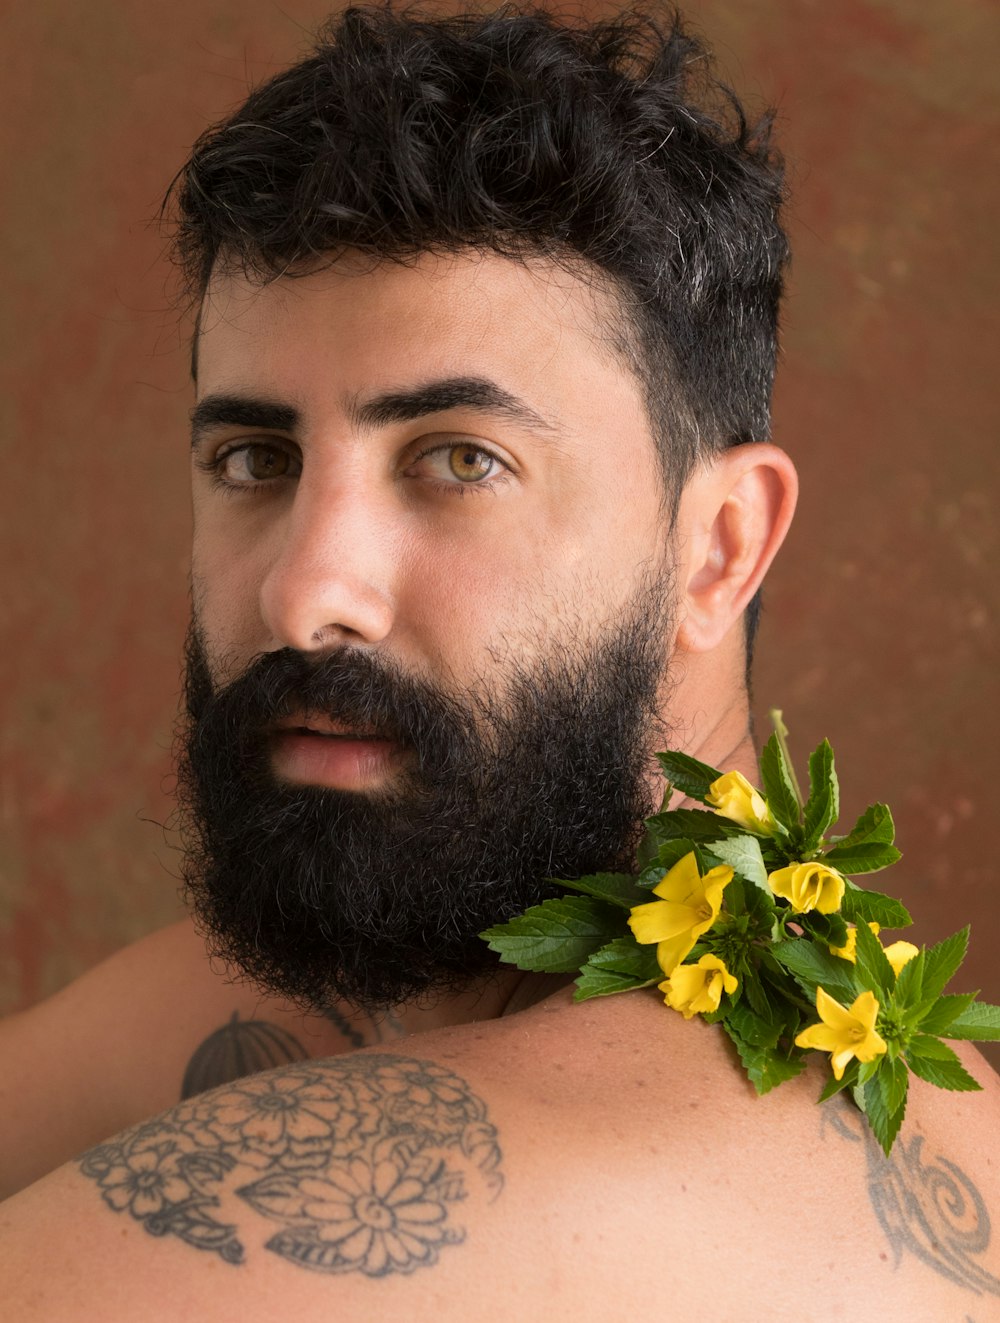 a man with a beard and tattoos